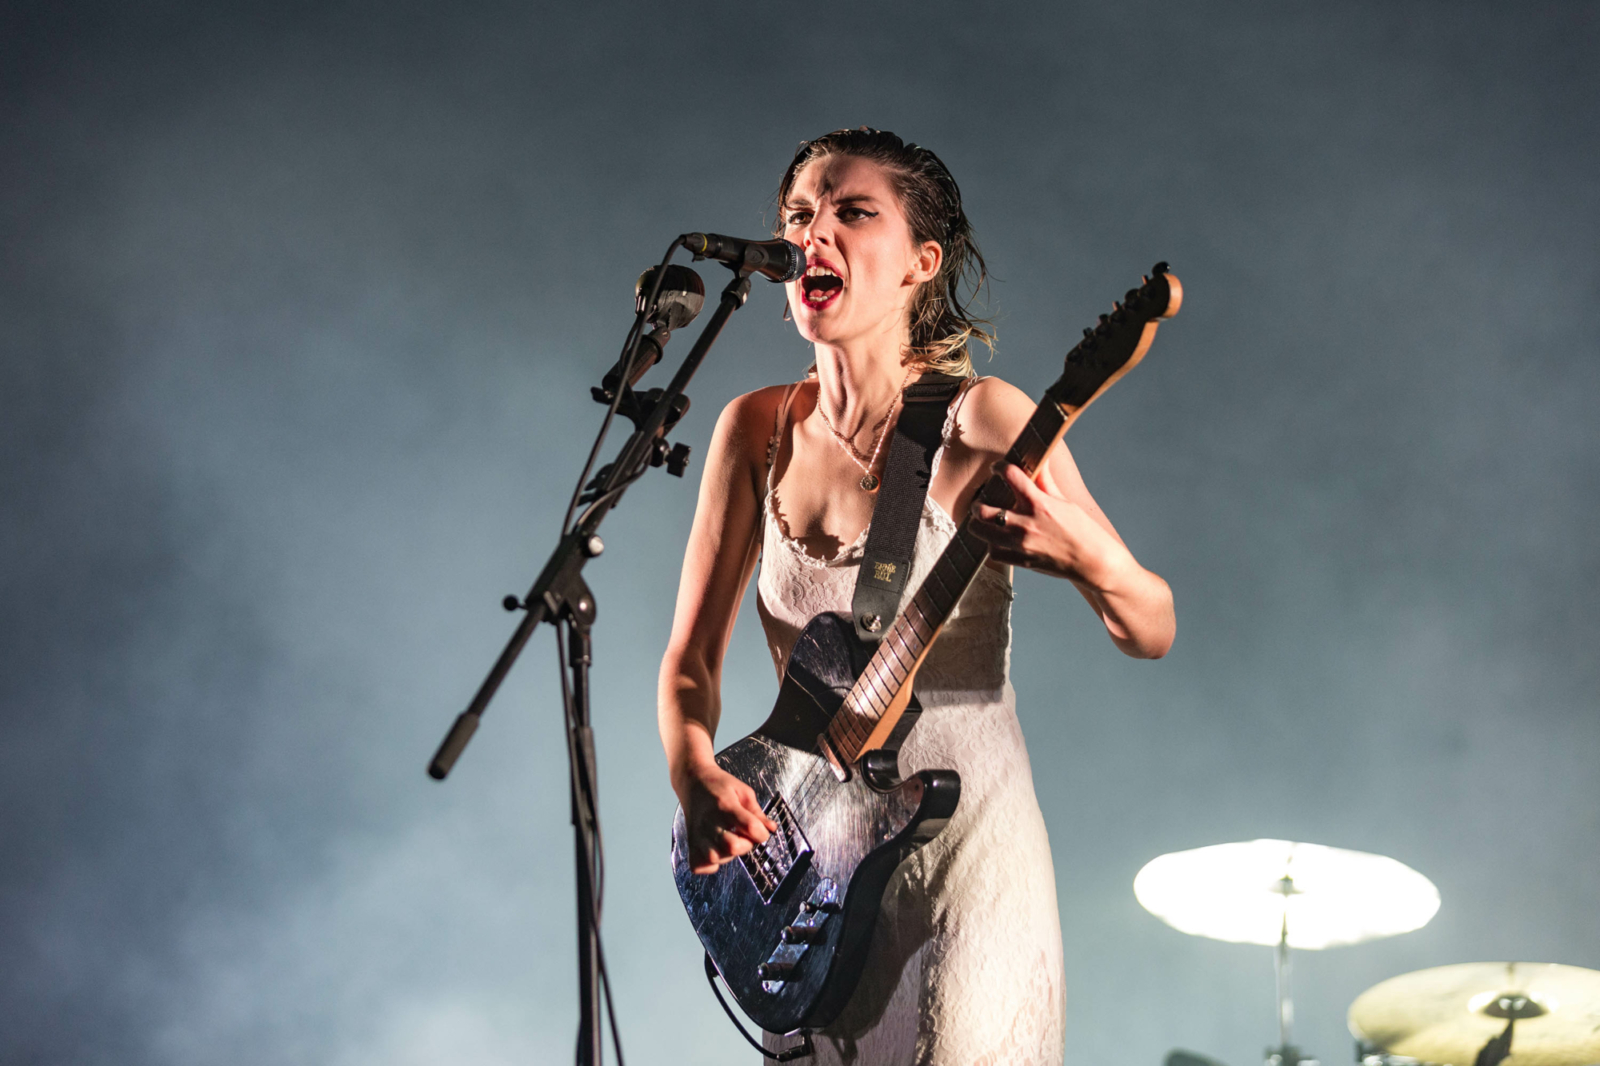 Wolf Alice, Jack White, The Big Moon and more are set for Mad Cool 2018